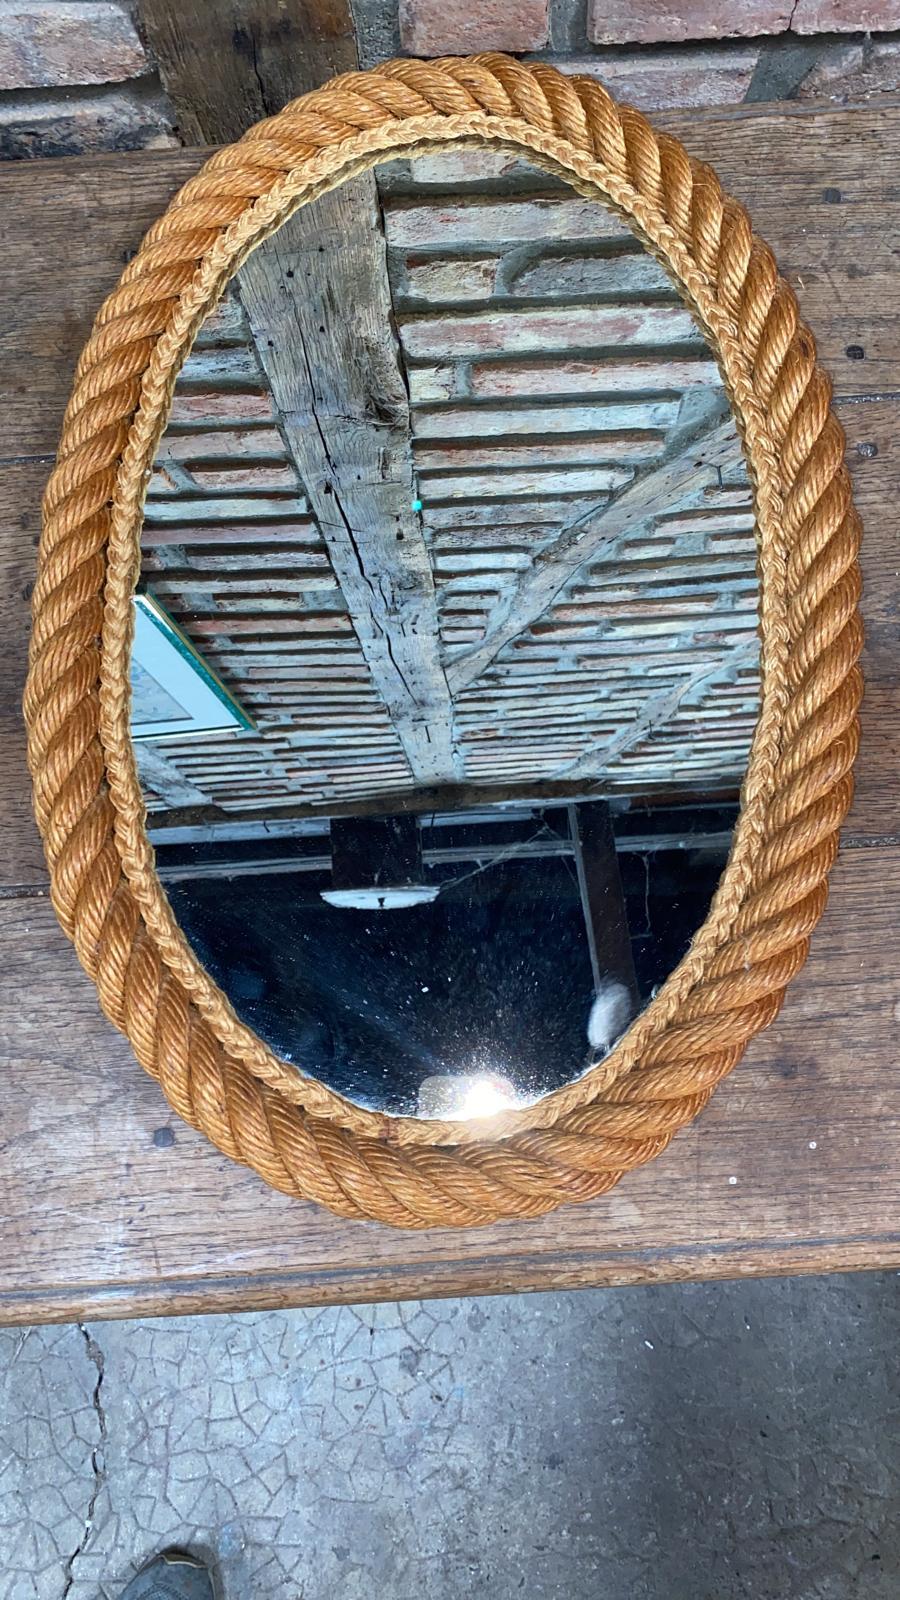 Large oval rope mirror Audoux Minet, circa 1960 from South of France.
21.5 inches Height / 14.5 inches Width